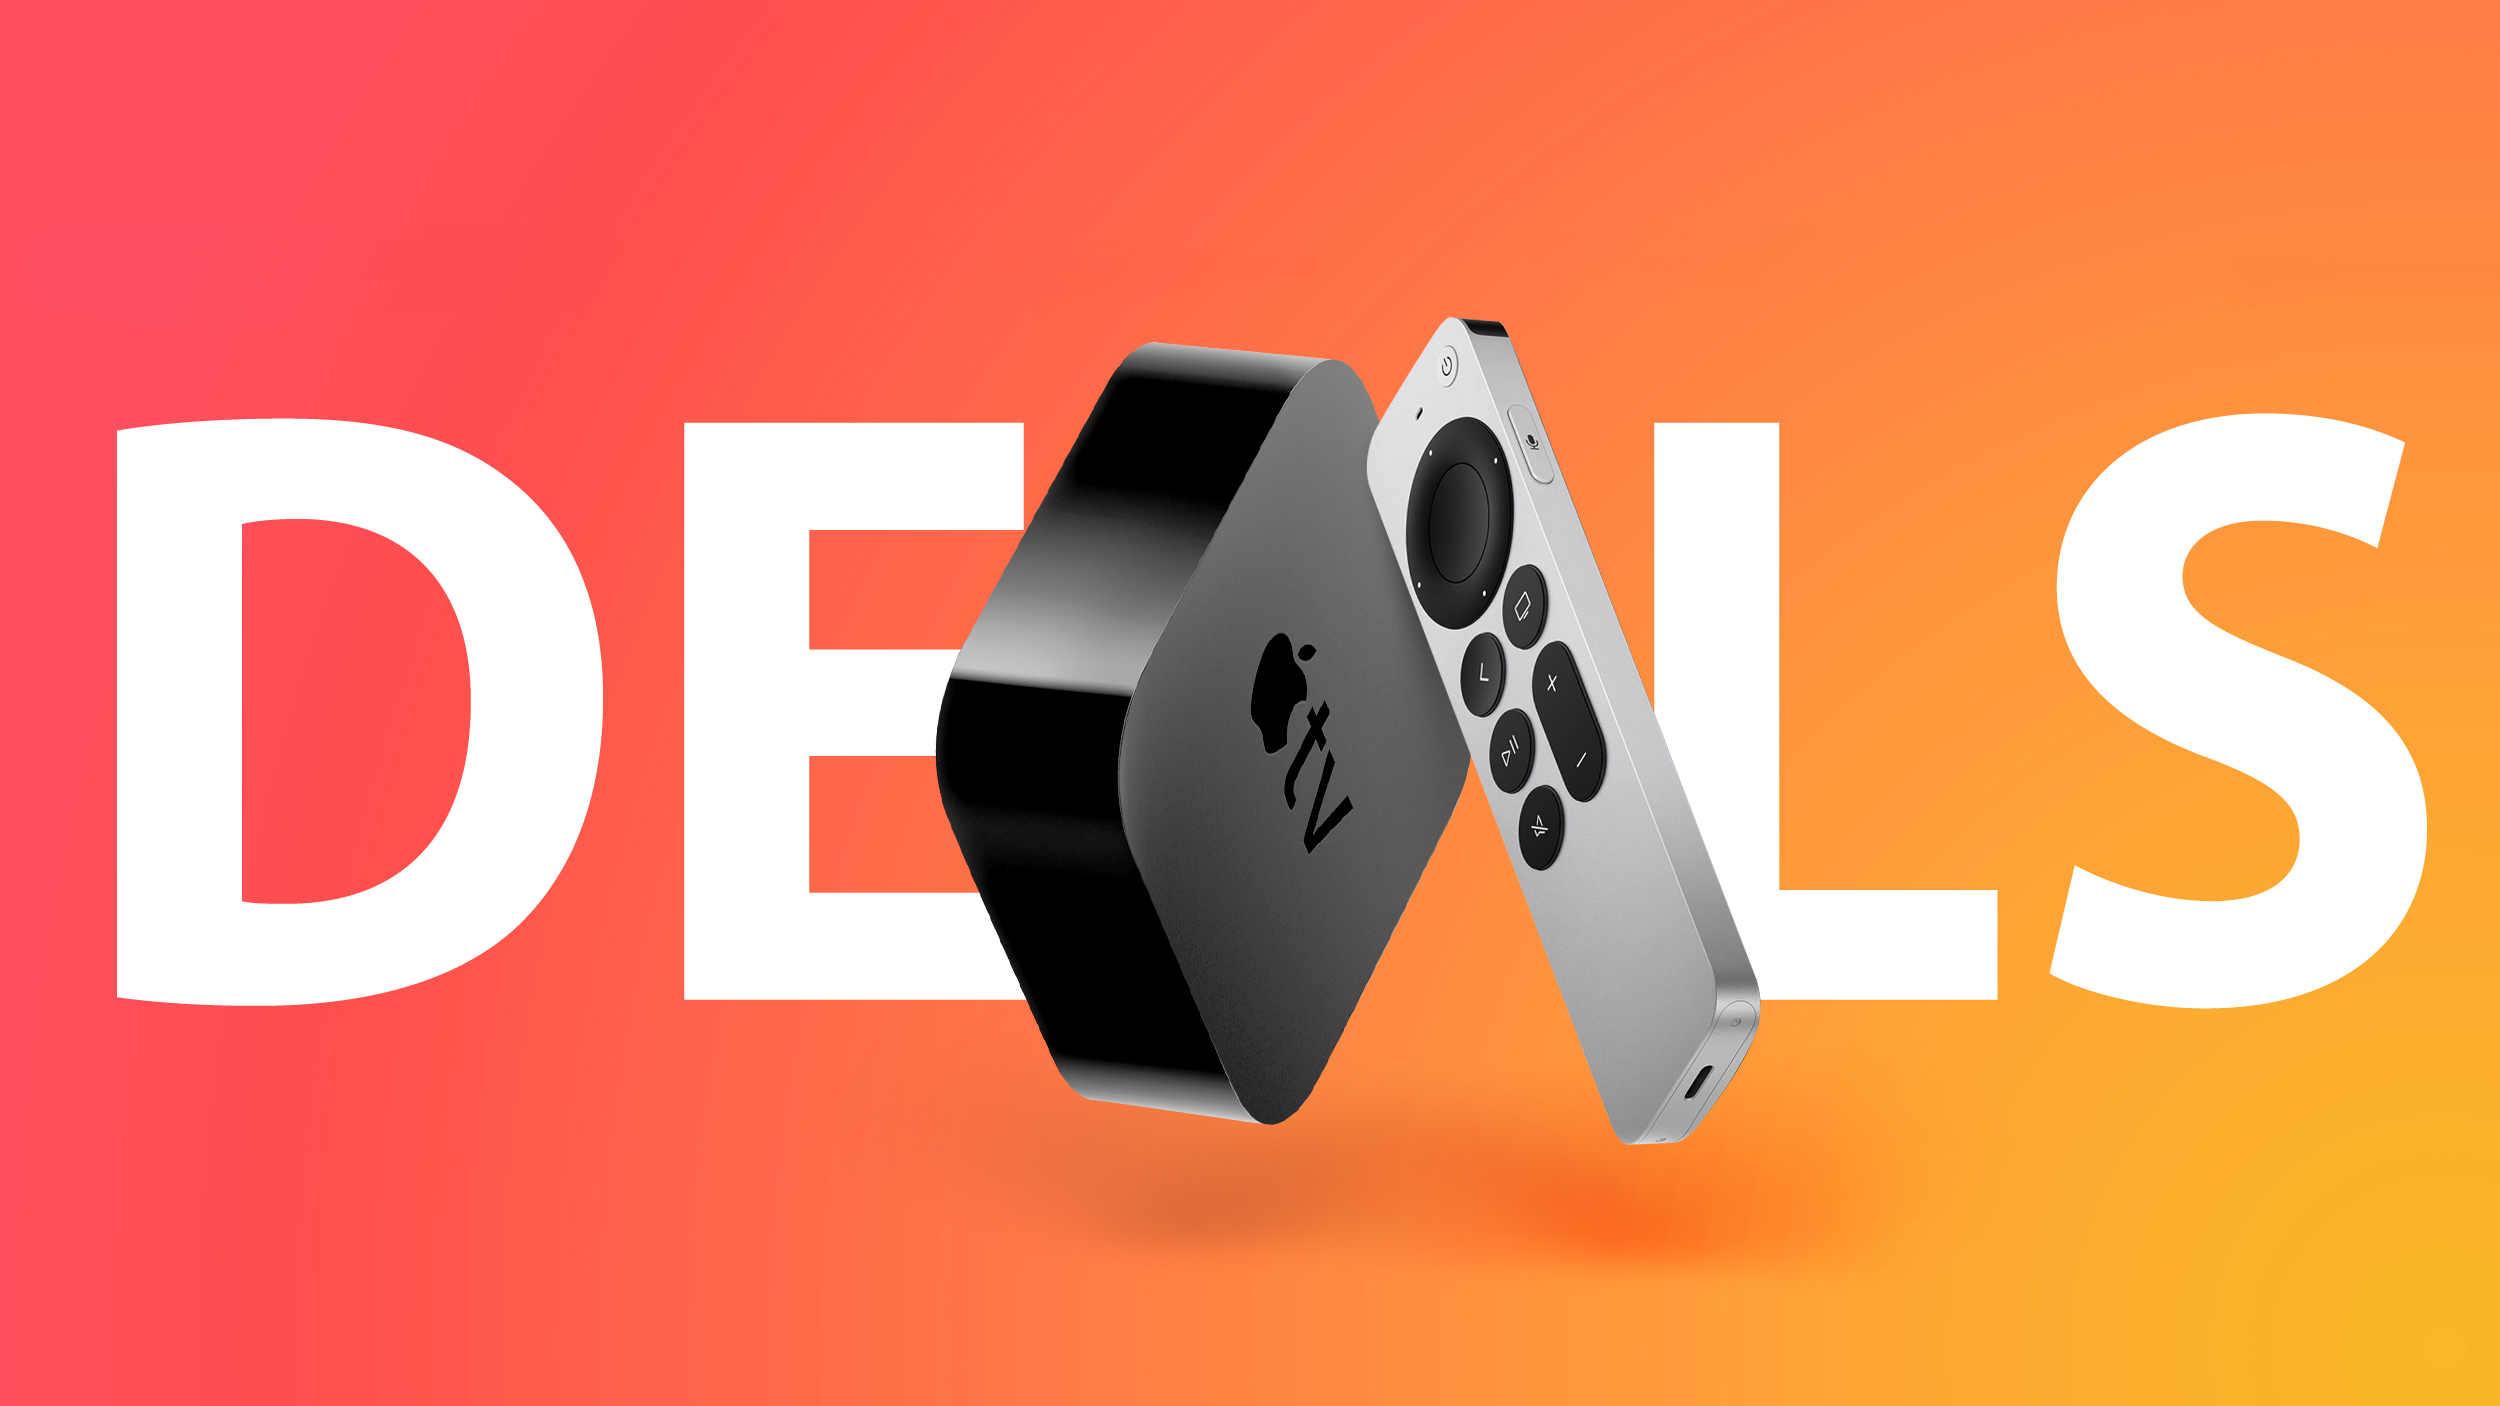 Deals: Apple TV 4K Available for $119.99 on Amazon ($59 Off)